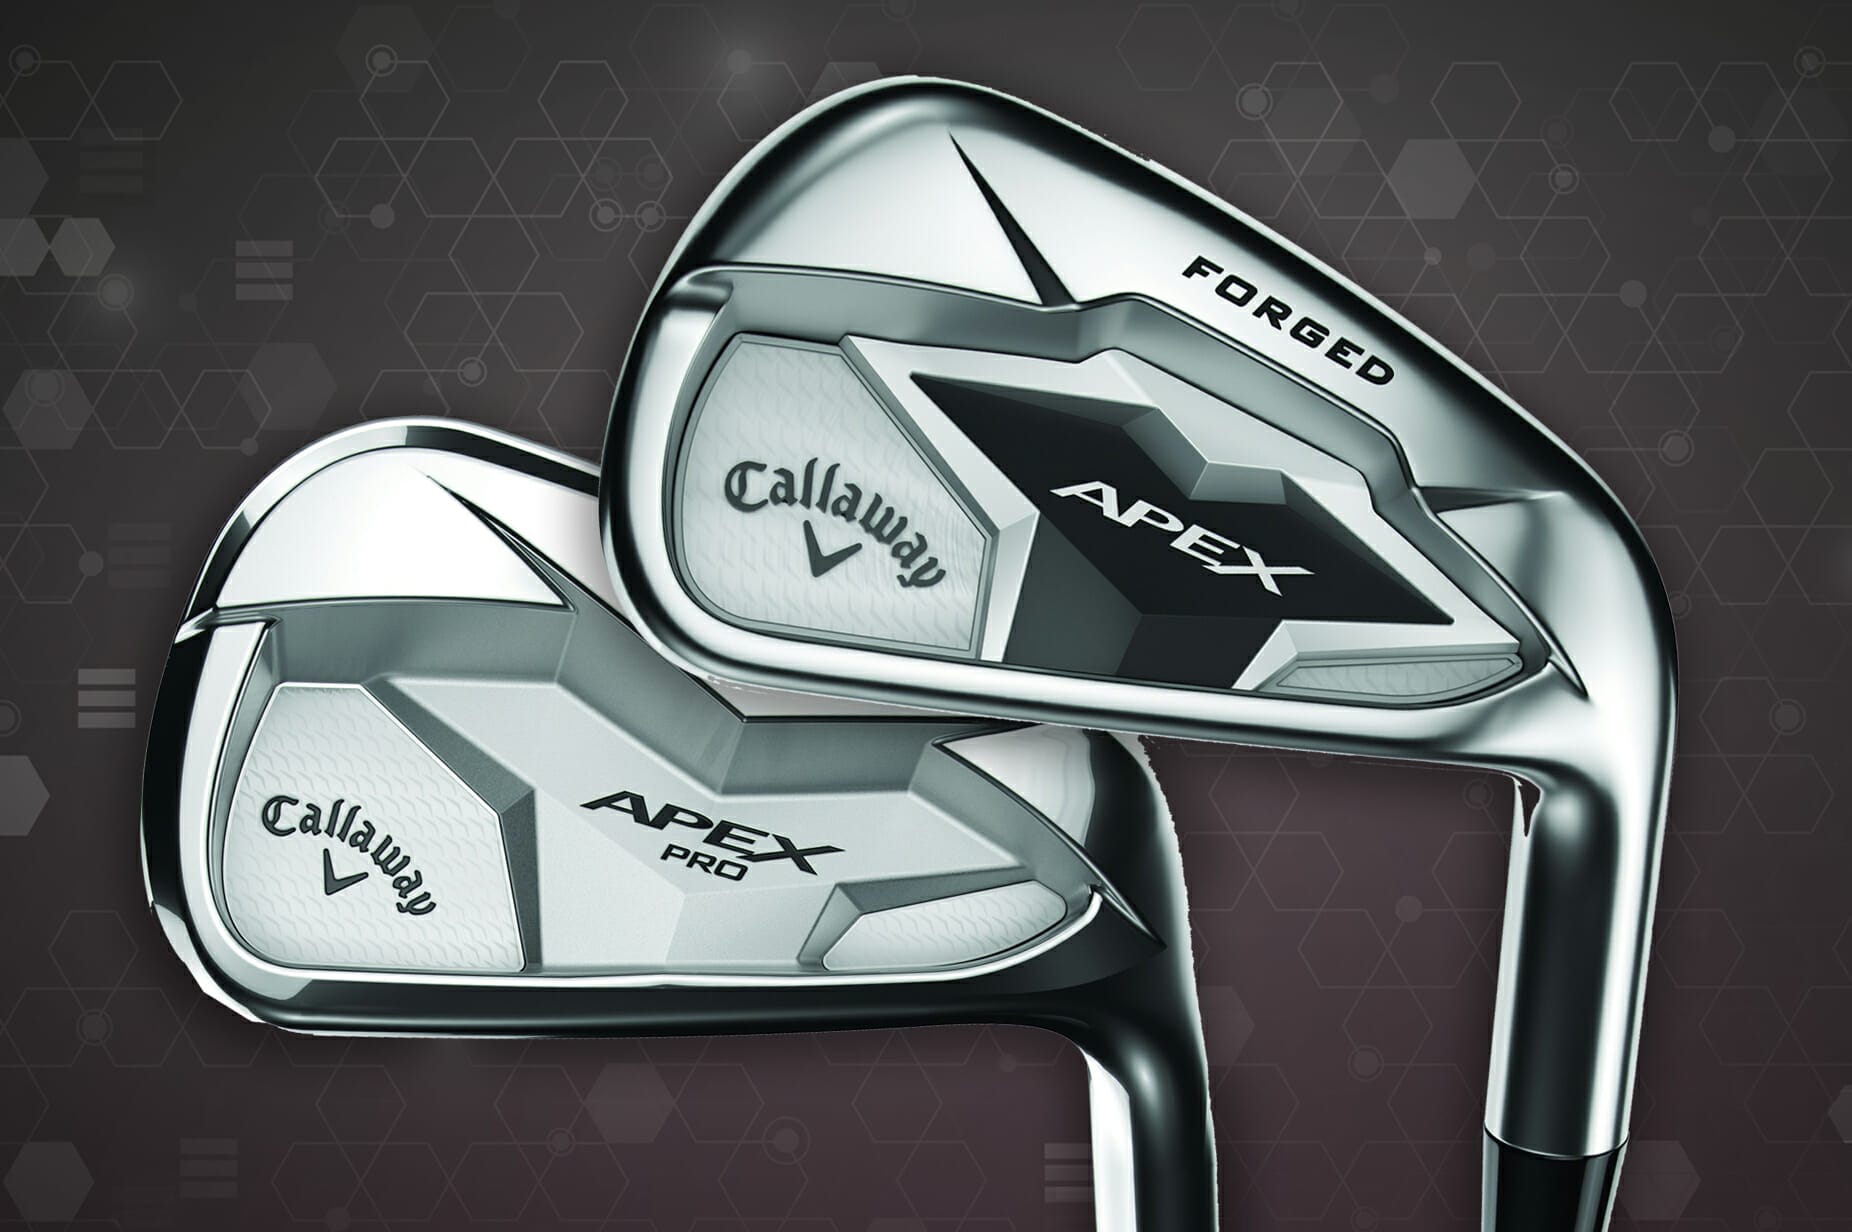 2019 Callaway Apex and Apex Pro Irons unveiled